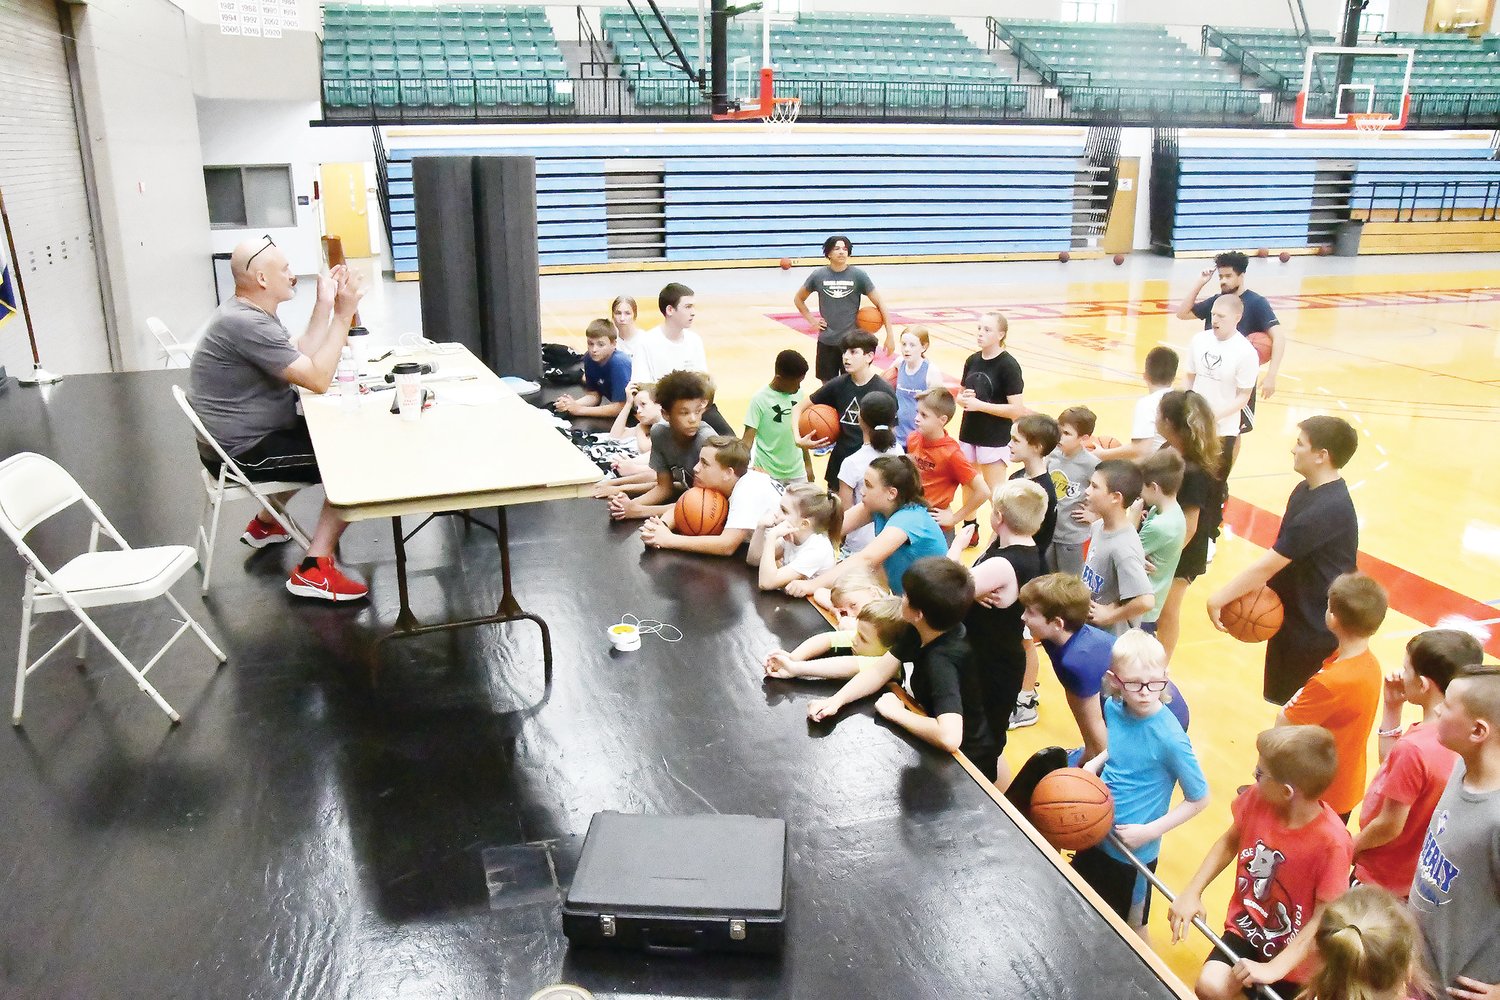 Moberly Area Community College head men's basketball coach and athletic director Pat Smith talks to youngsters during a break at last week's camp. The camp ran from June 6-10 at Fitzsimmons-John Arena.